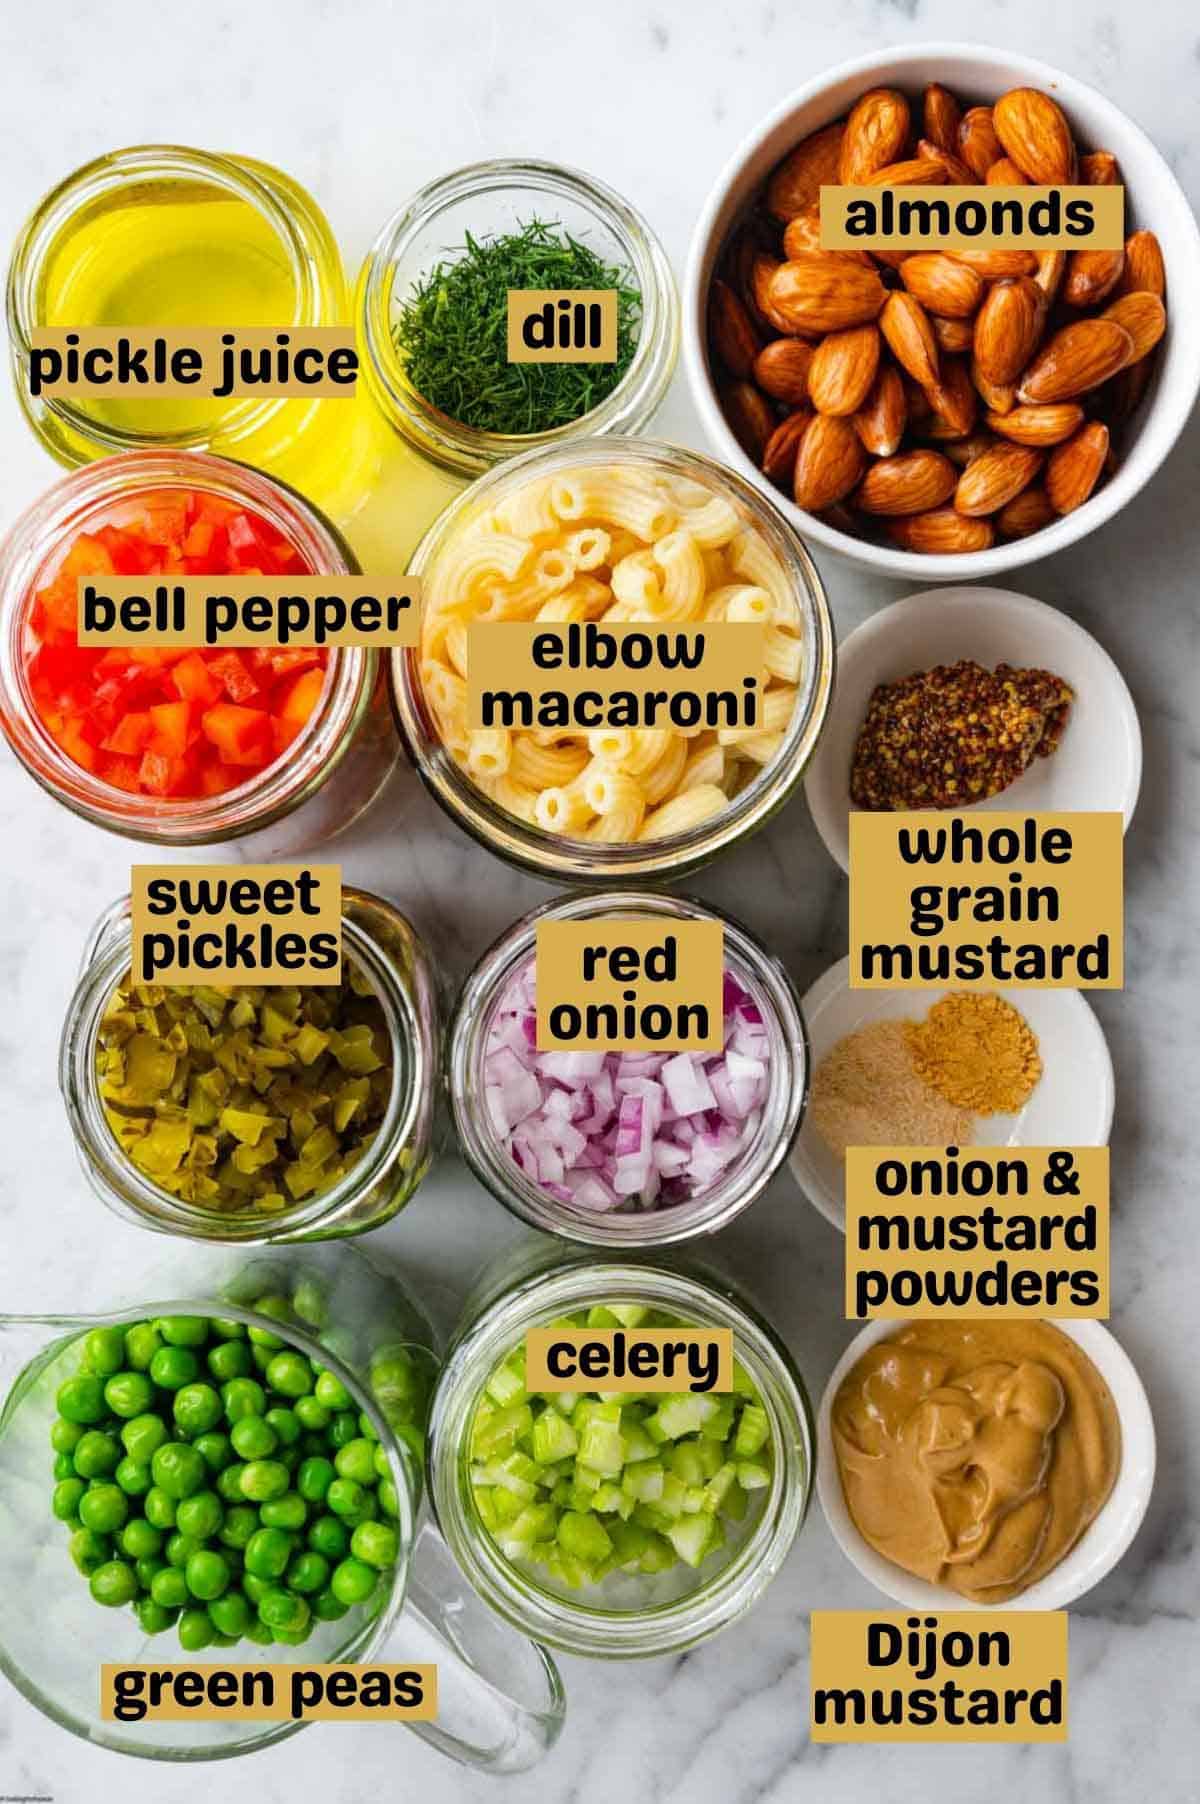 Pickle juice, dill, almonds, chopped red bell pepper, elbow macaroni, whole grain mustard, chopped sweet pickles, chopped red onion, onion and mustard powder, green peas, chopped celery, and Dijon mustard in separate containers on a white marble board.